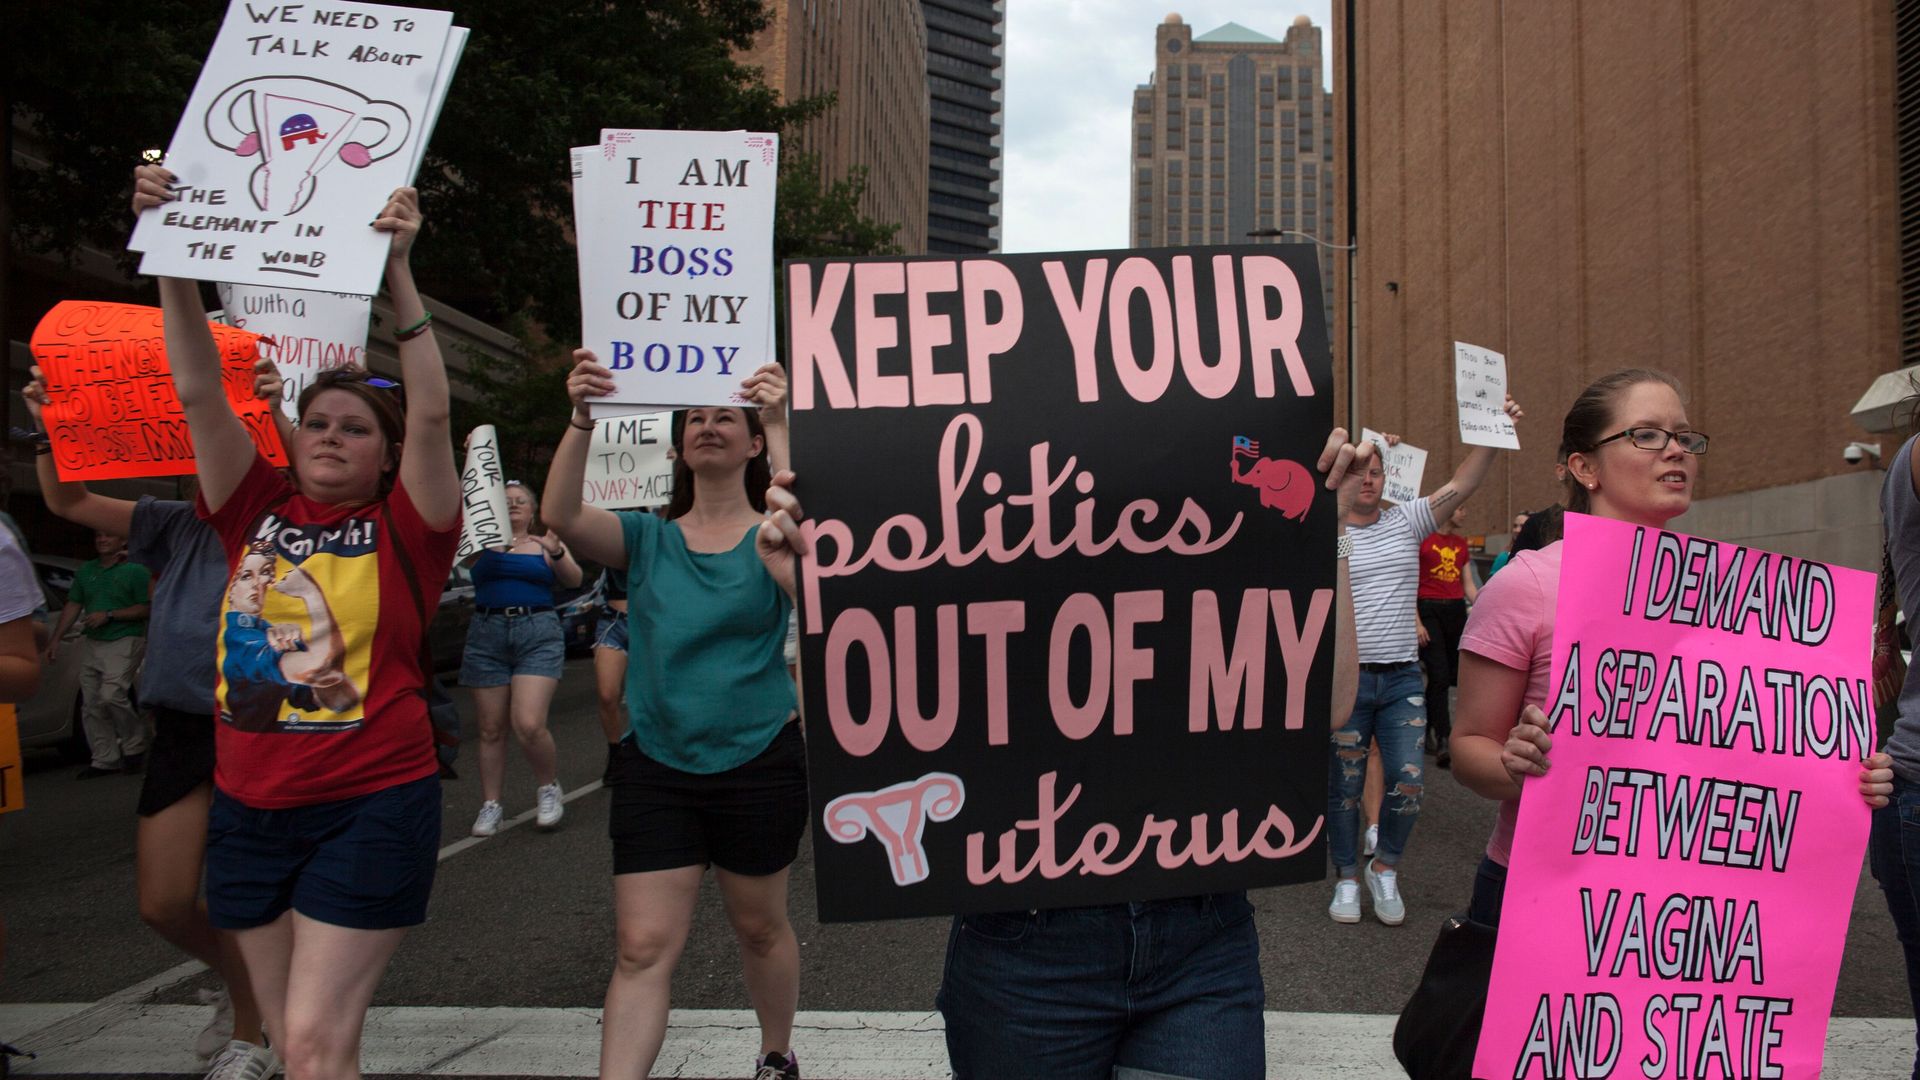 A protest in Birmingham, Alabama, against the state's tough new abortion laws.